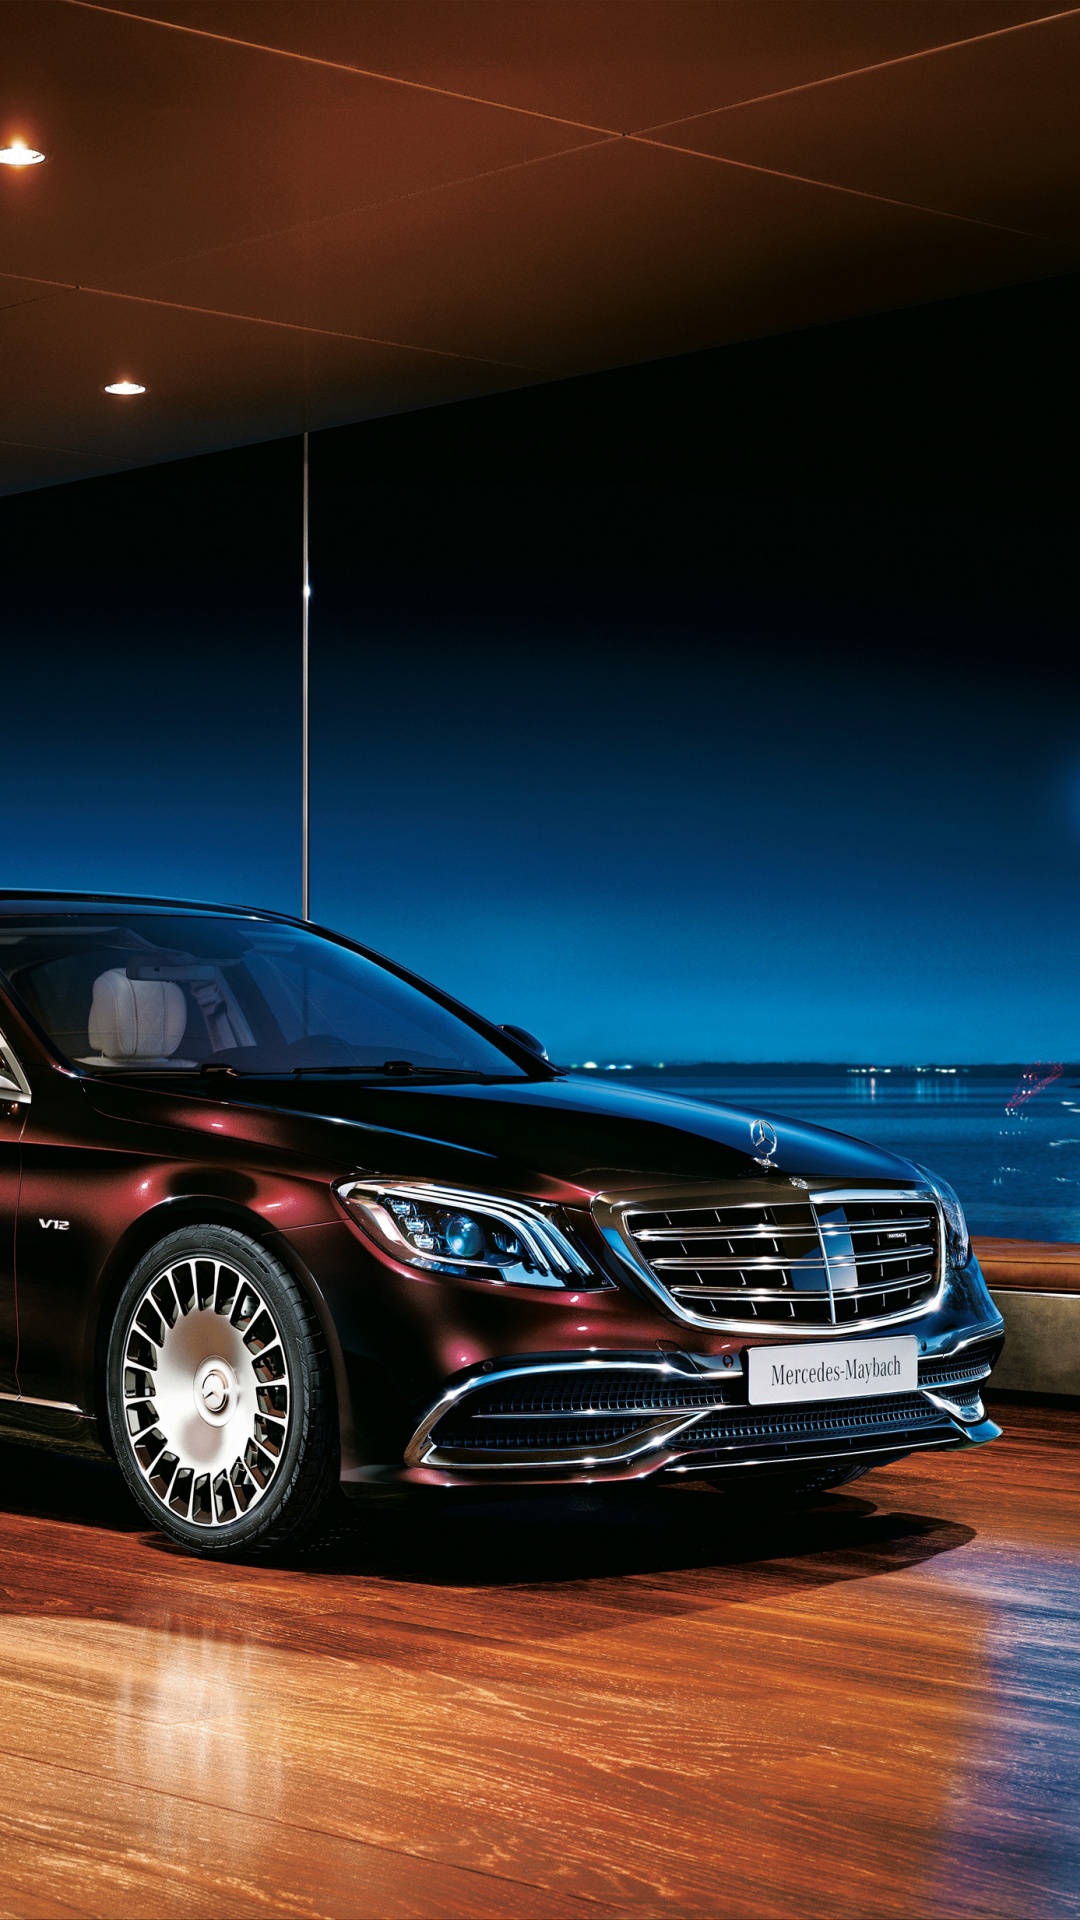 110+ Mercedes-Benz S-Class HD Wallpapers and Backgrounds